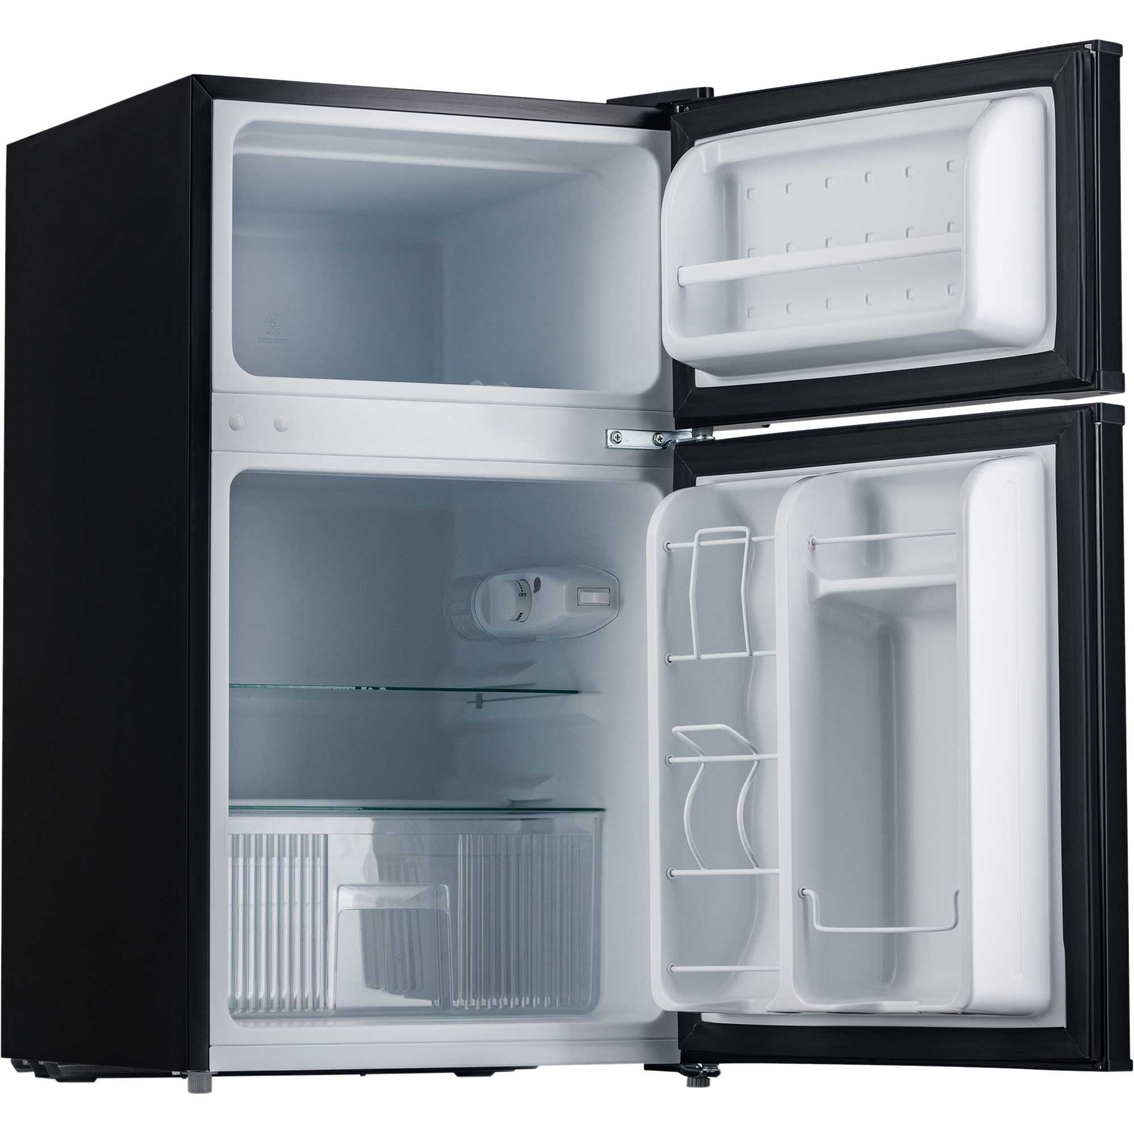 New Air LLC 3.1 cu. ft. Compact Refrigerator - Image 5 of 10